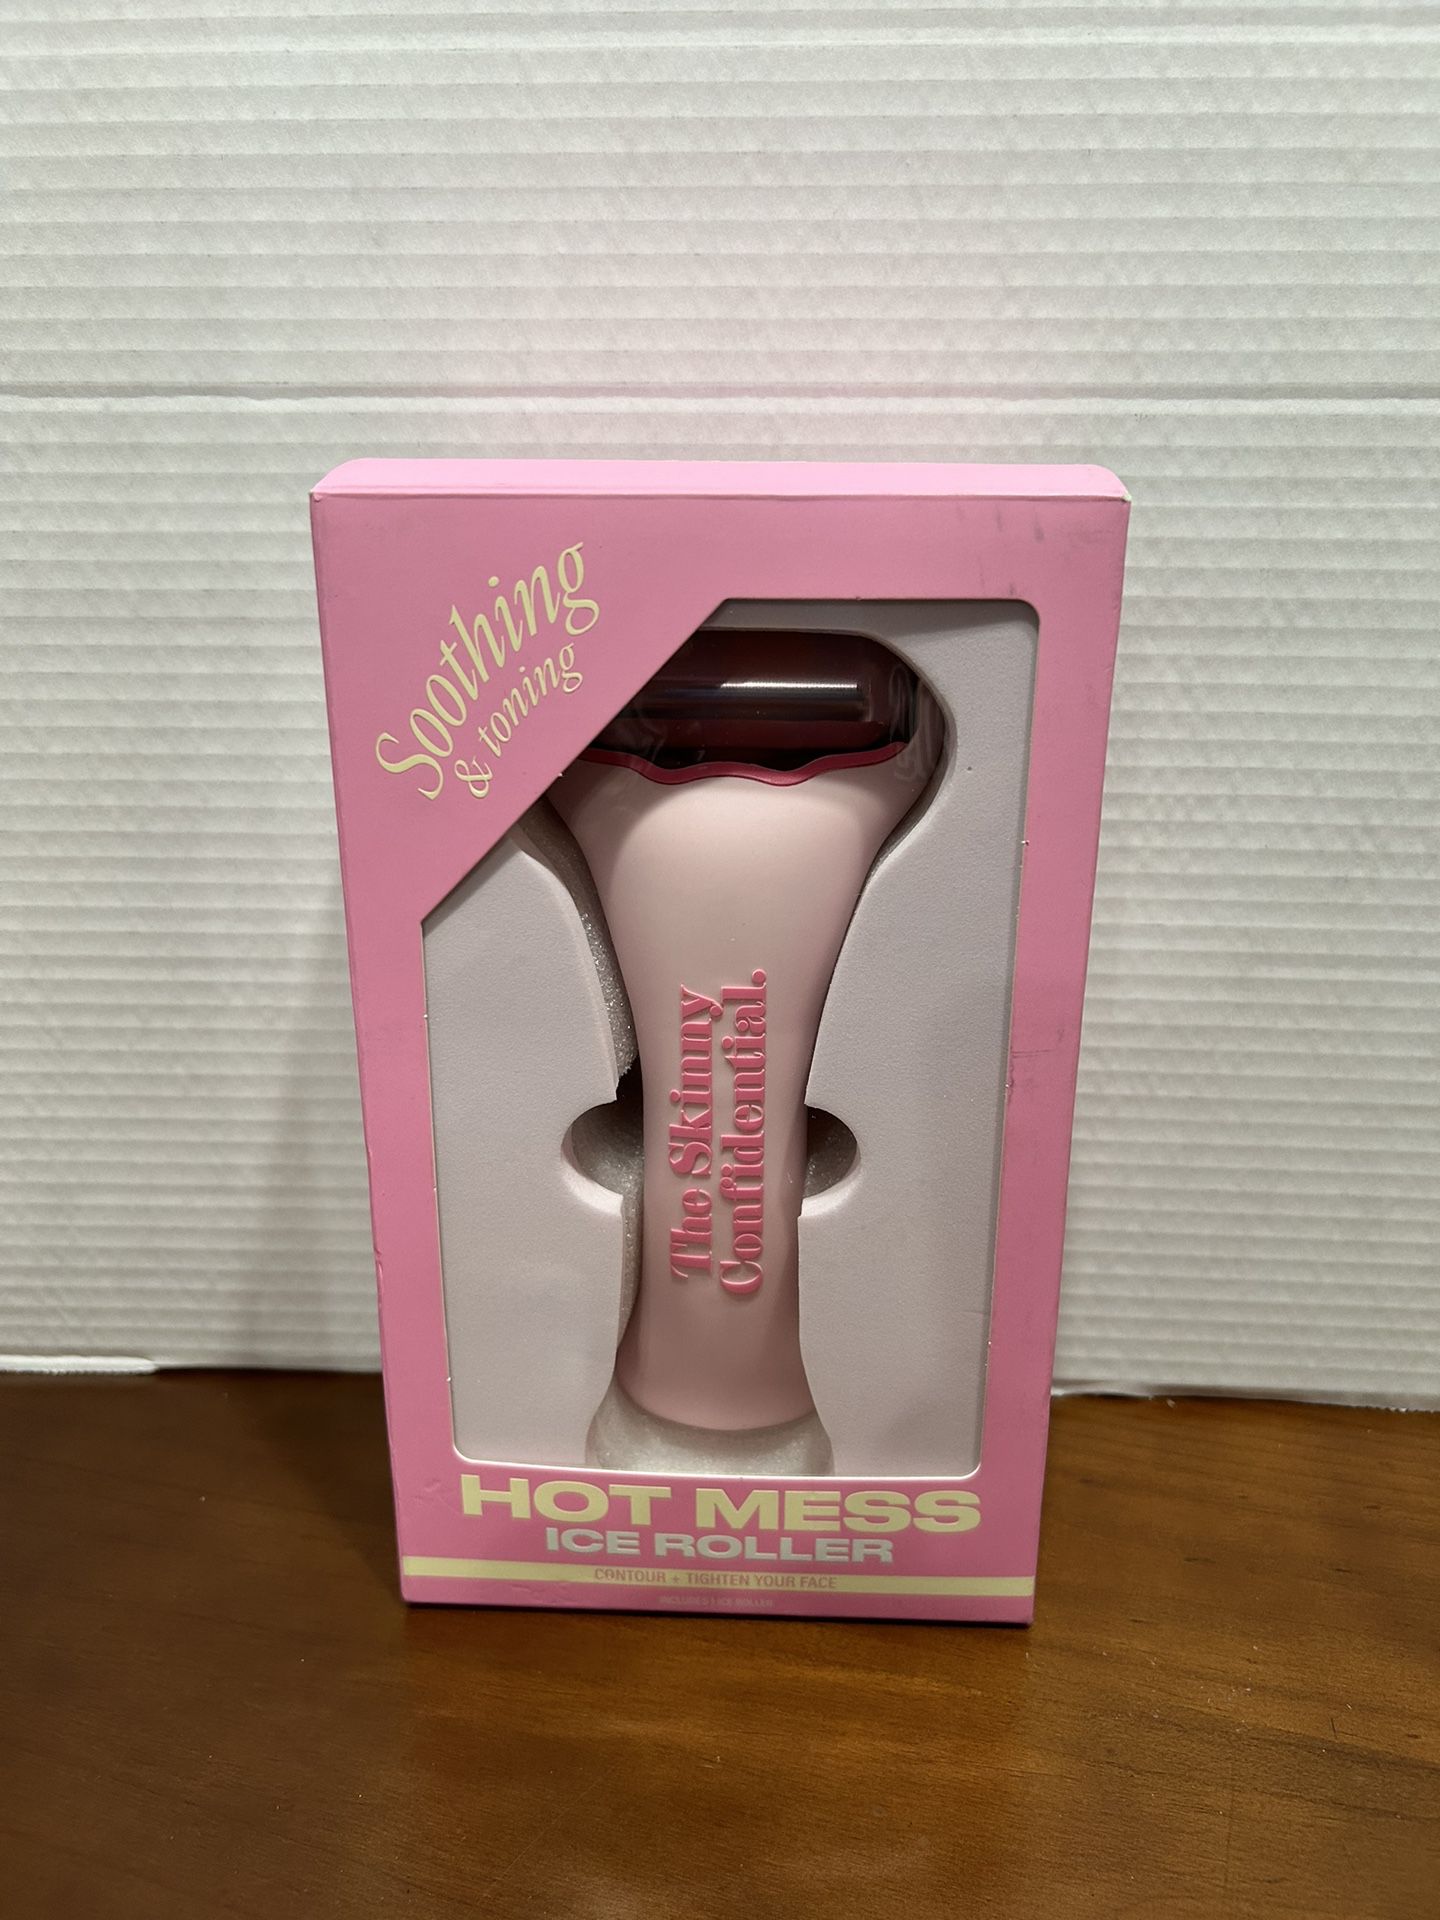 The Skinny Confidential HOT Mess Ice Roller, Skin Care Tools to Debloat, NEW!